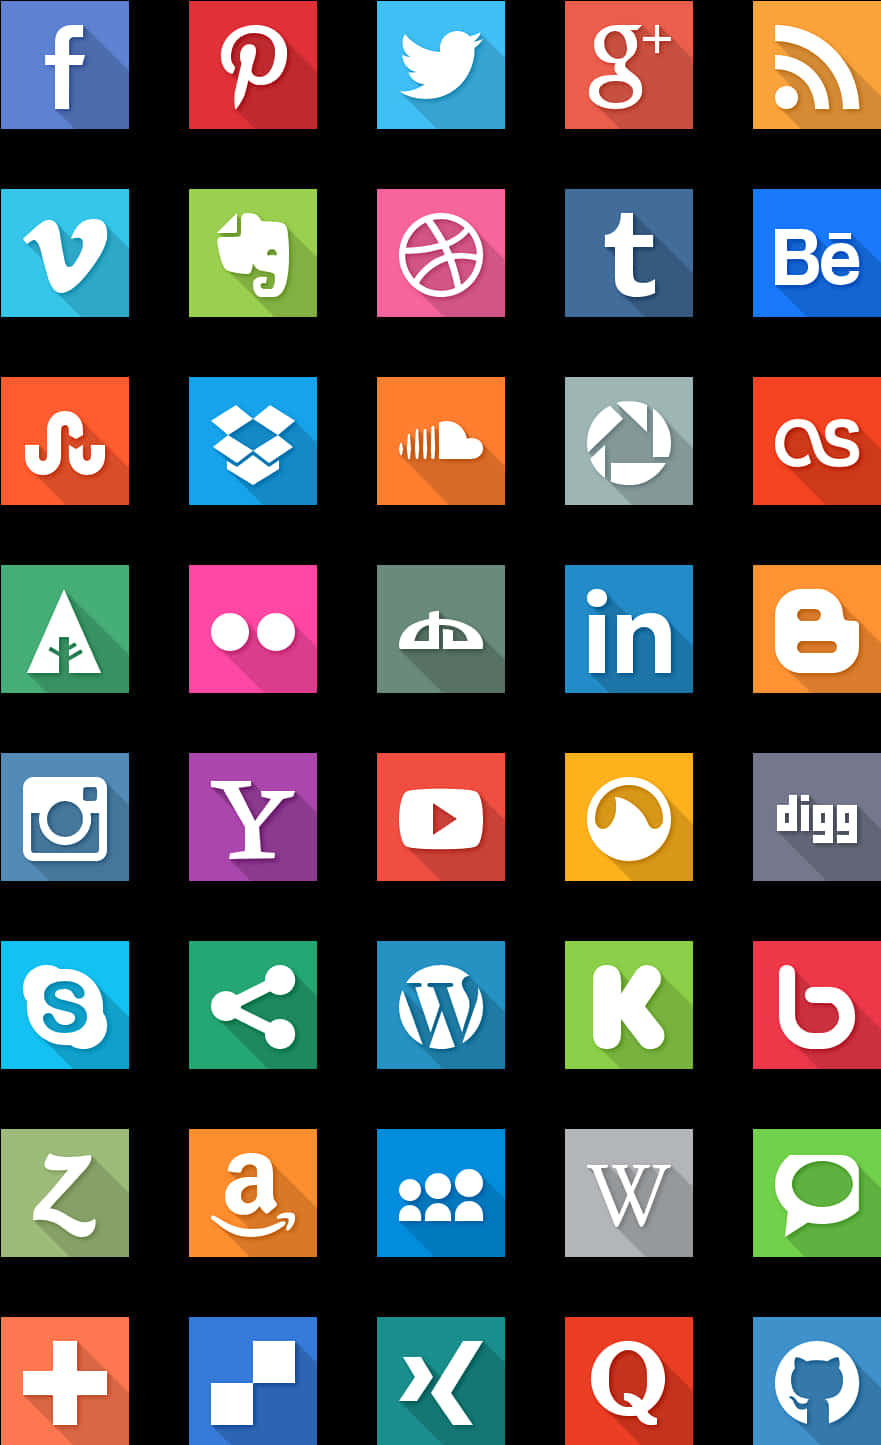 A Screenshot Of A Black Background With Many Square Icons